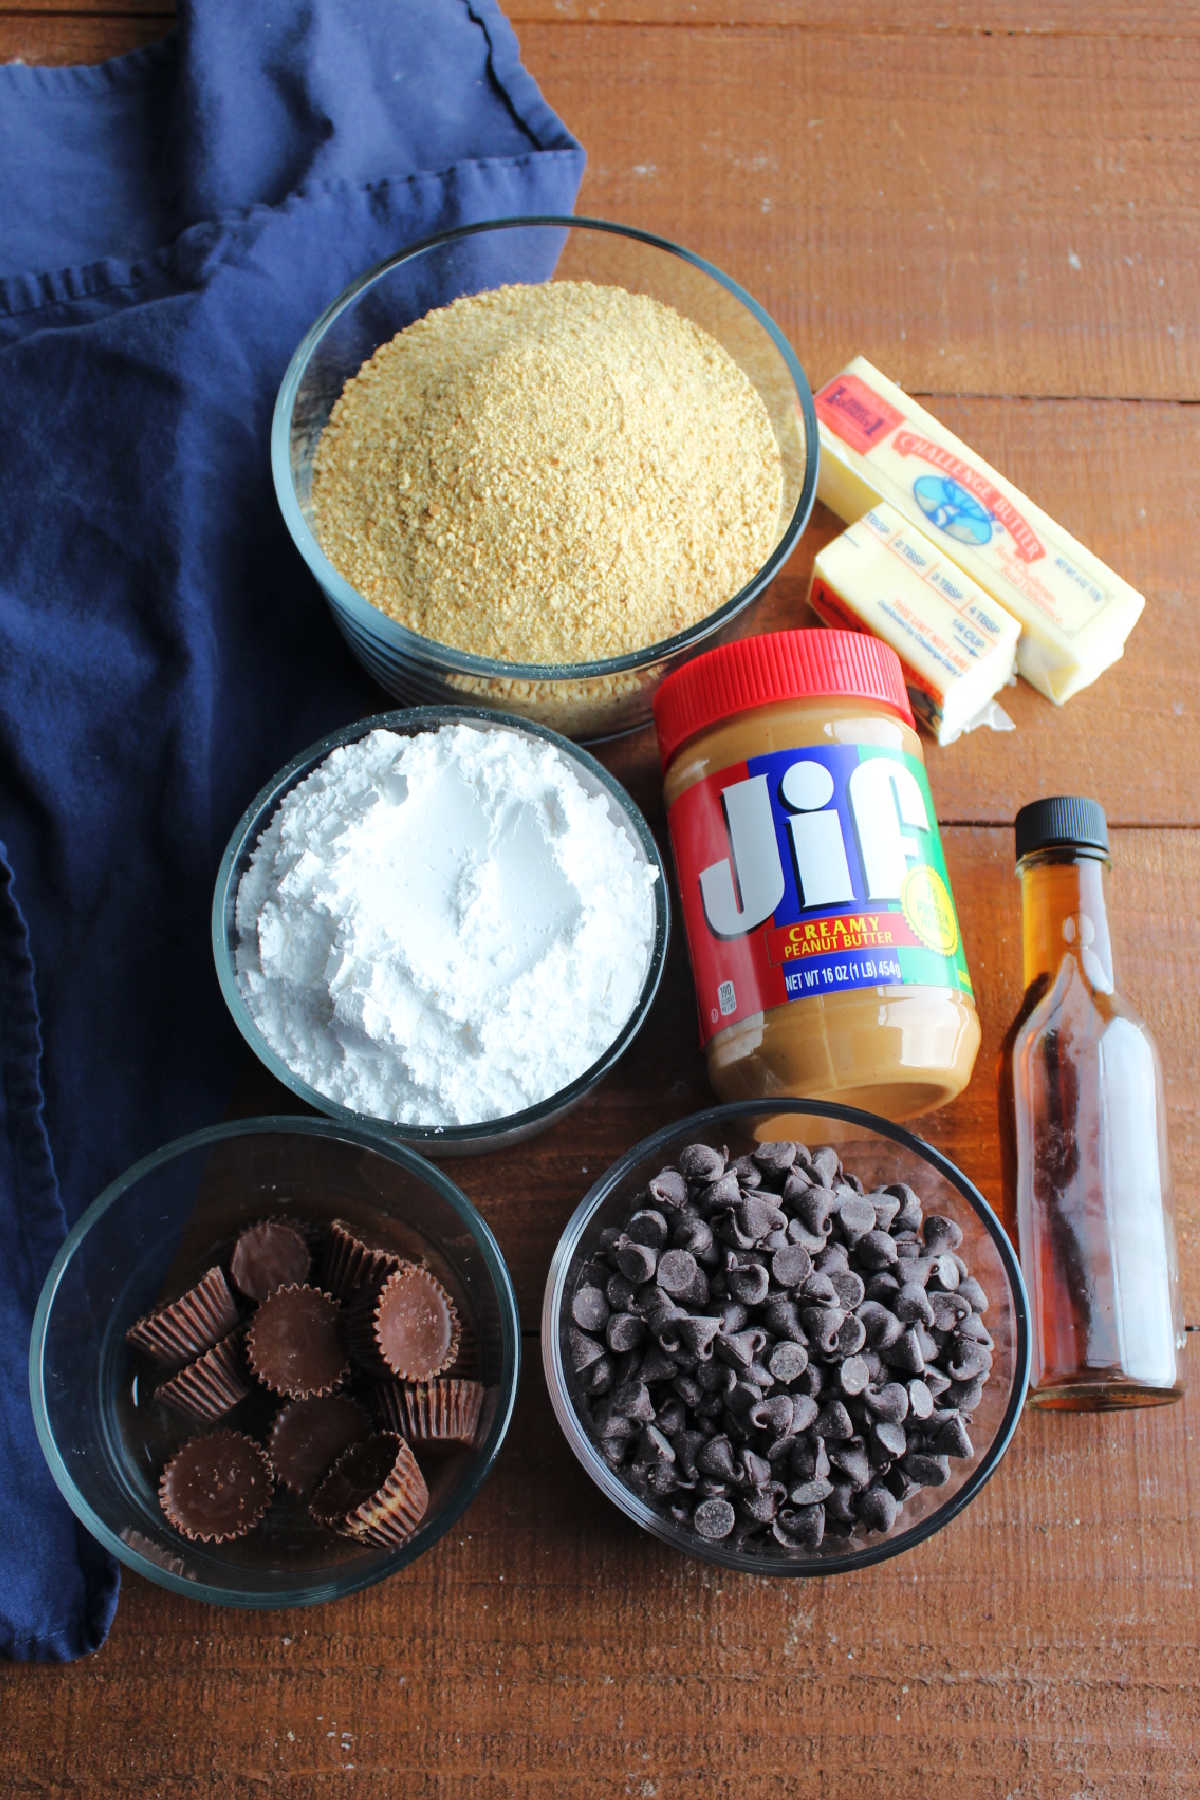 Ingredients: creamy peanut butter, powdered sugar, graham cracker crumbs, butter, vanilla, chocolate chips and peanut butter cups ready to be made into peanut butter bars.